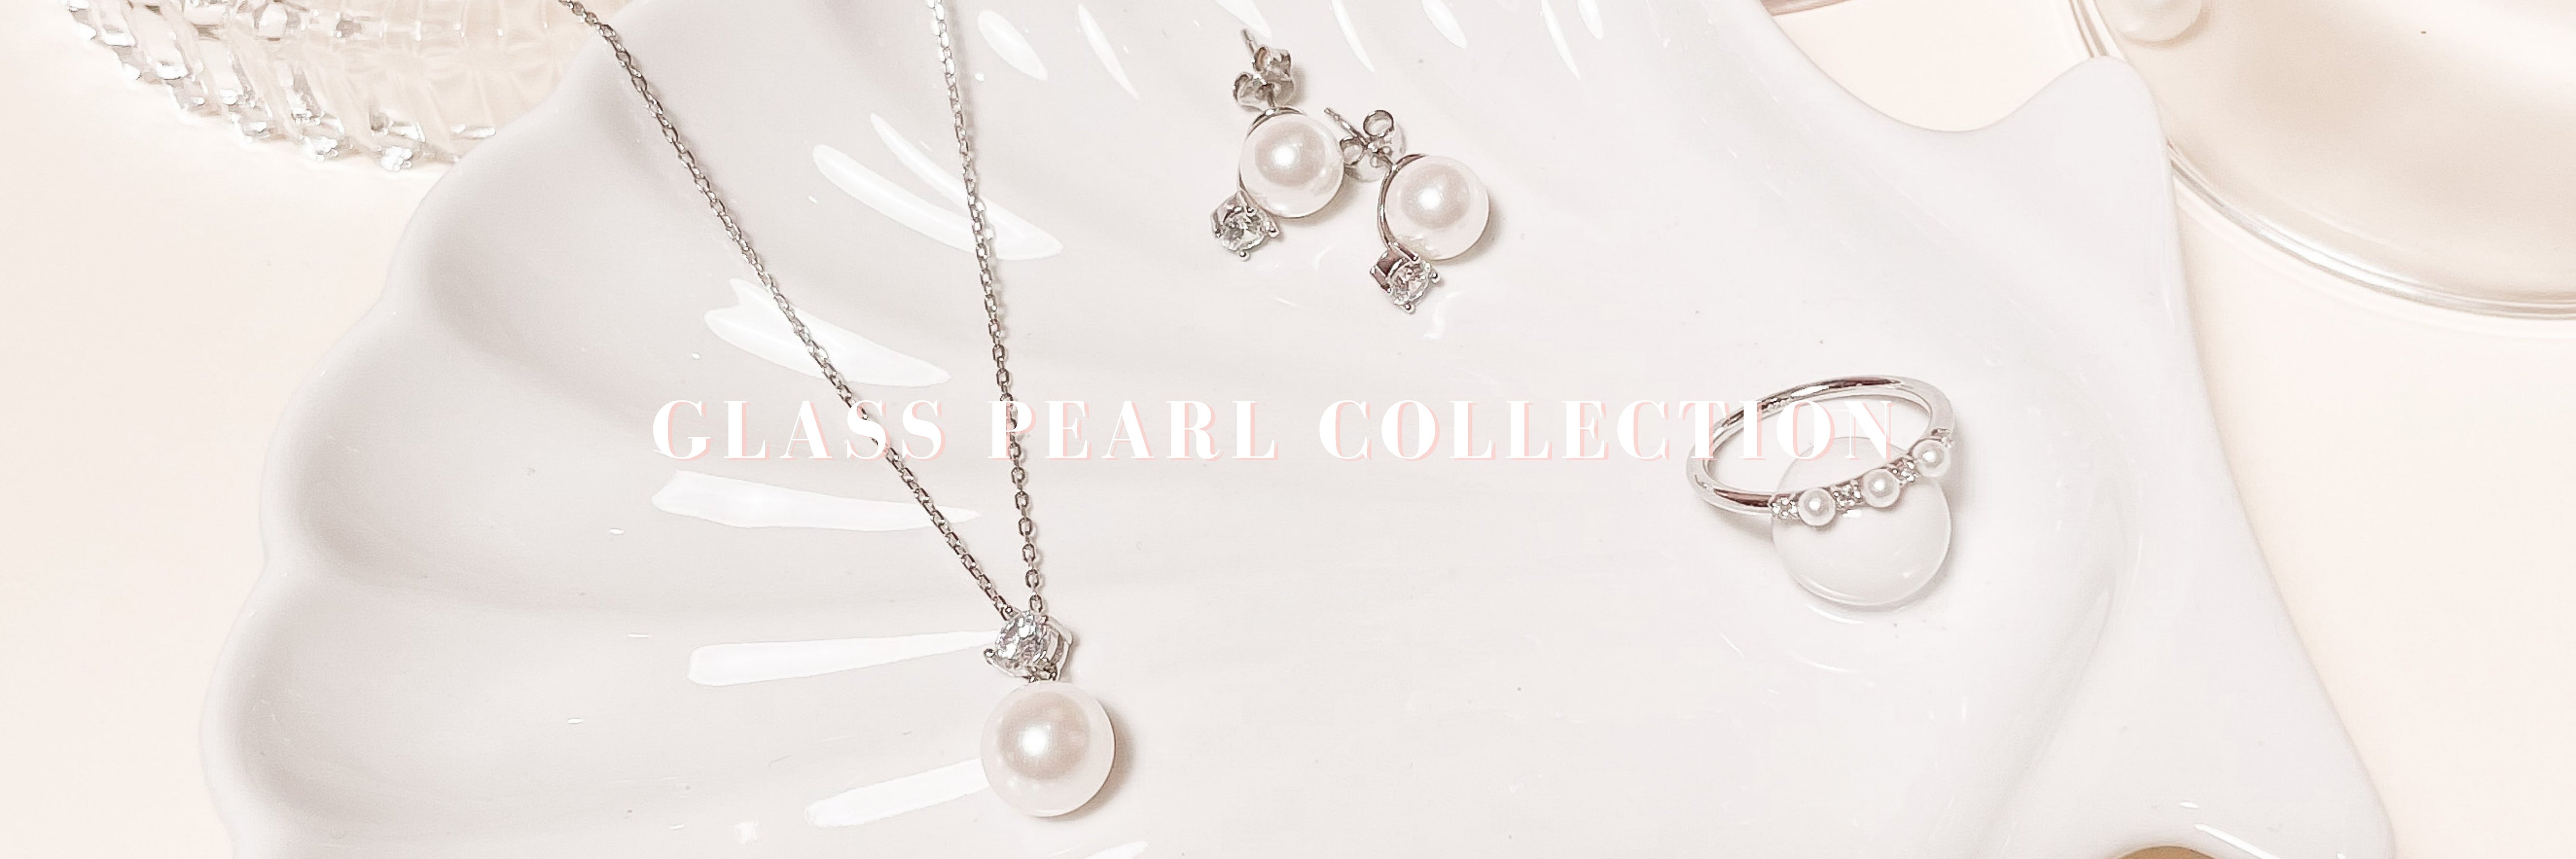 Glass Pearl Jewellery, Diamond Simulant, Affordable Jewellery, The Starry Co., Debbie Soon, 925 Silver, Hypoallergenic